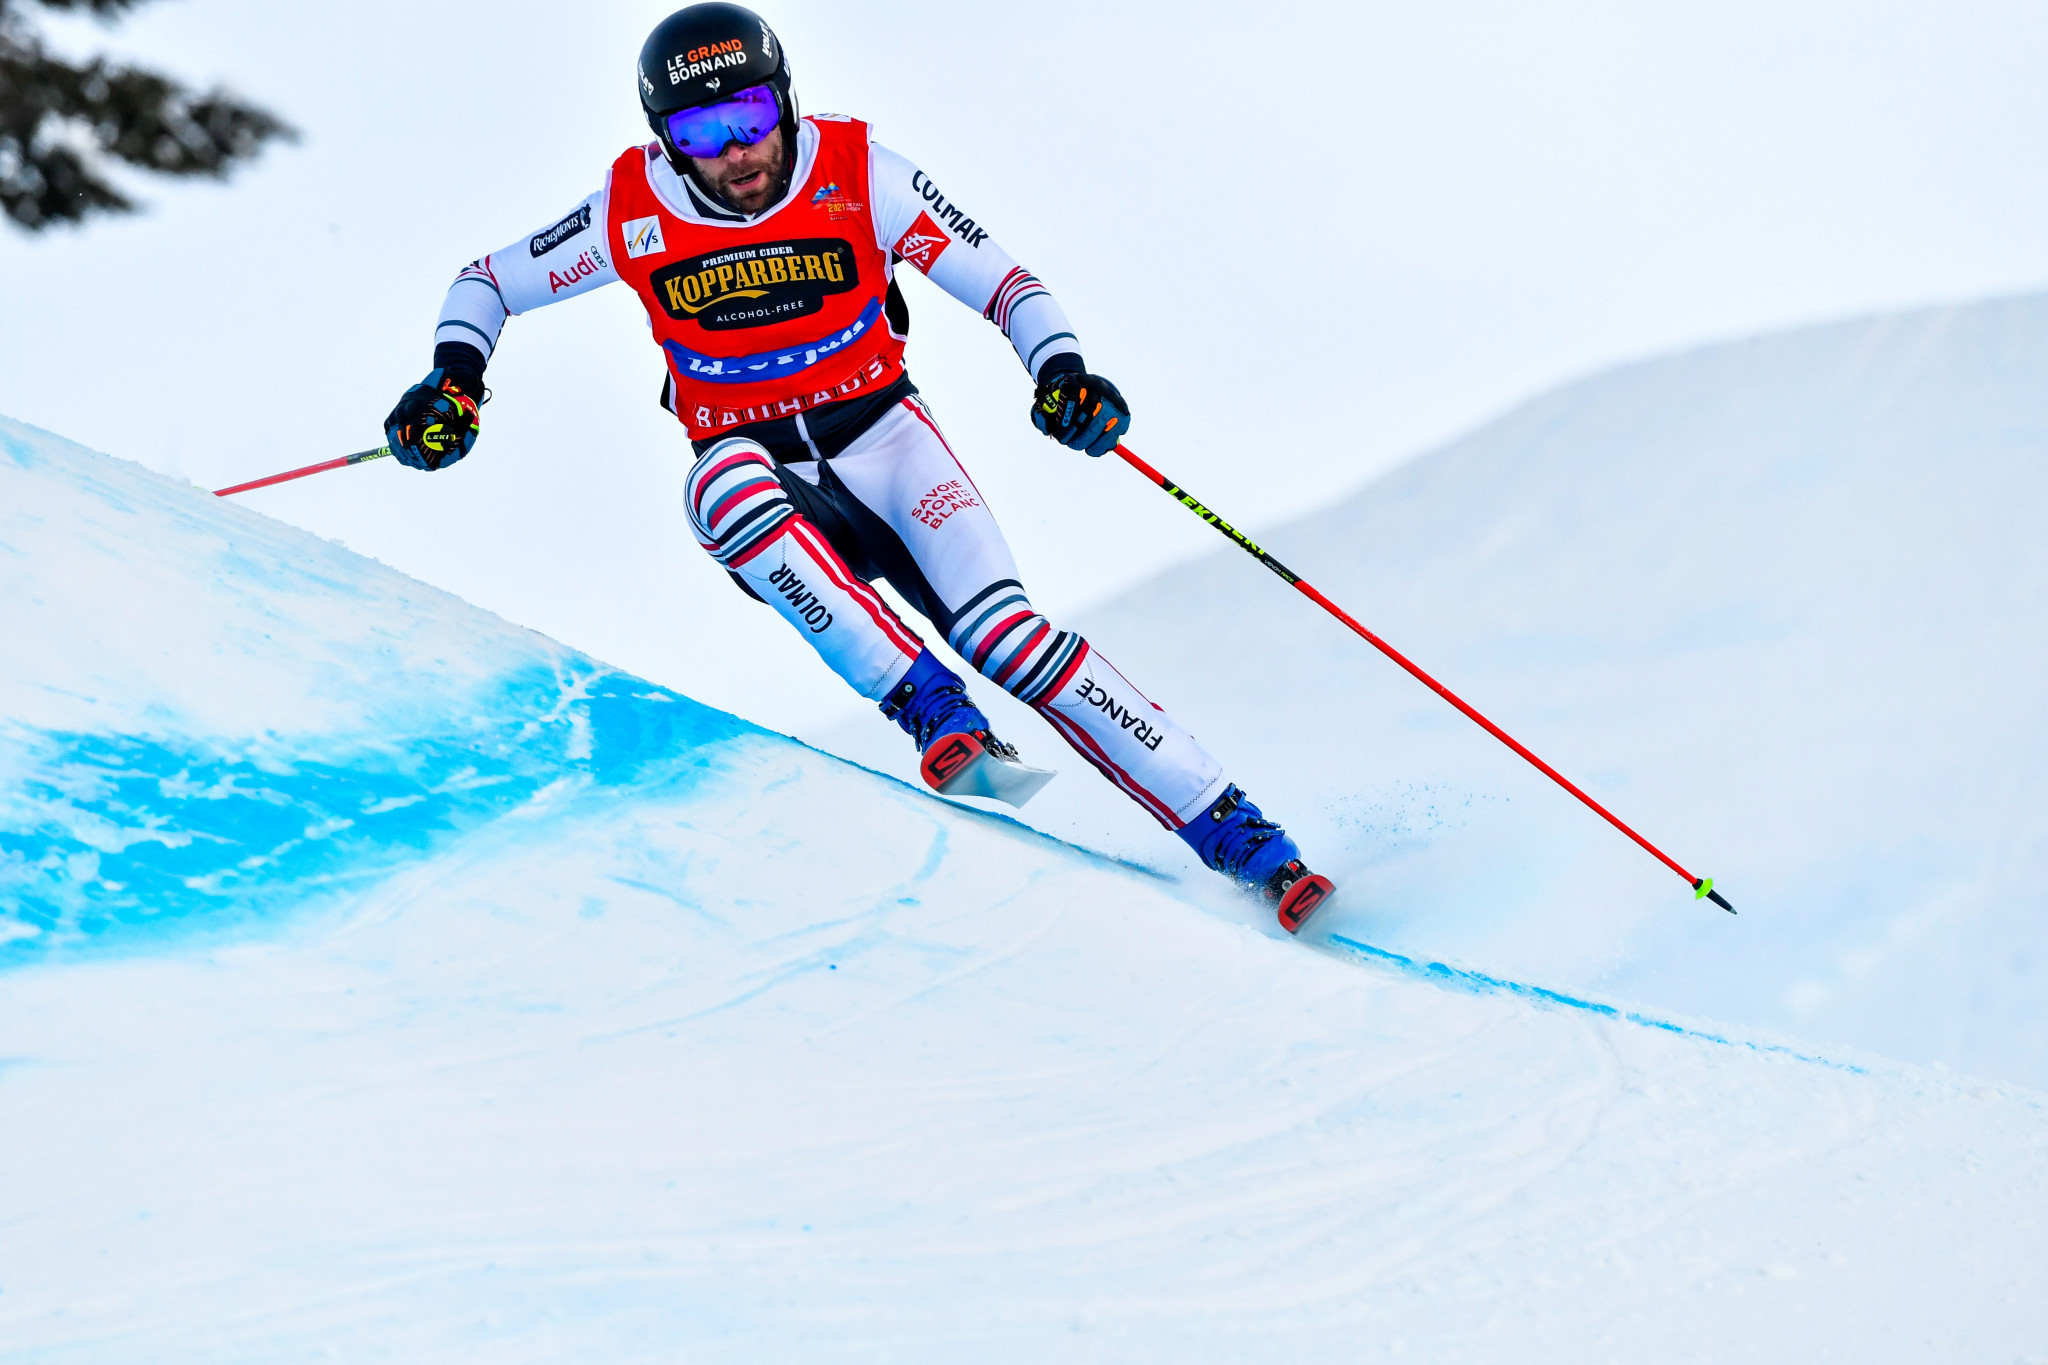 Midol and Smith top qualifying at FIS Ski Cross World Cup in Bakuriani